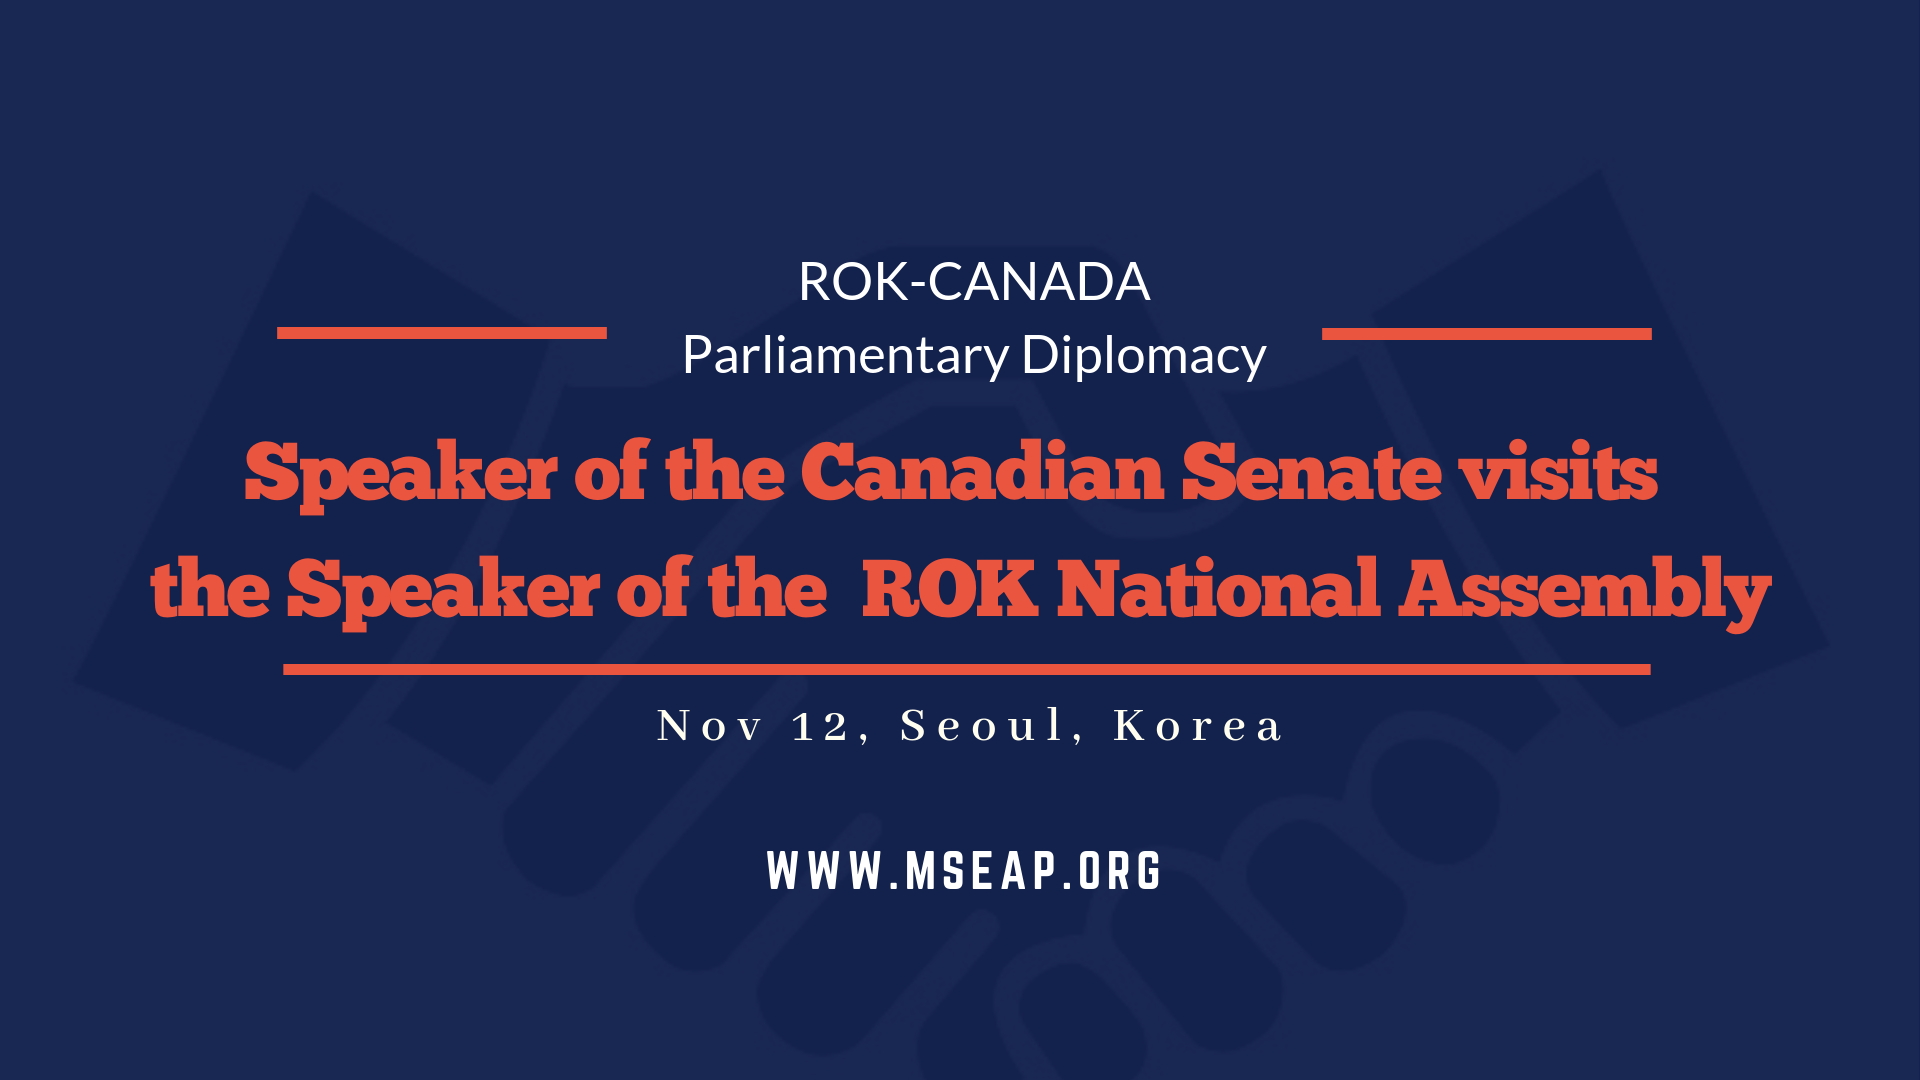 Speaker of the Canadian Senate meets the speaker of the ROK National Assembly